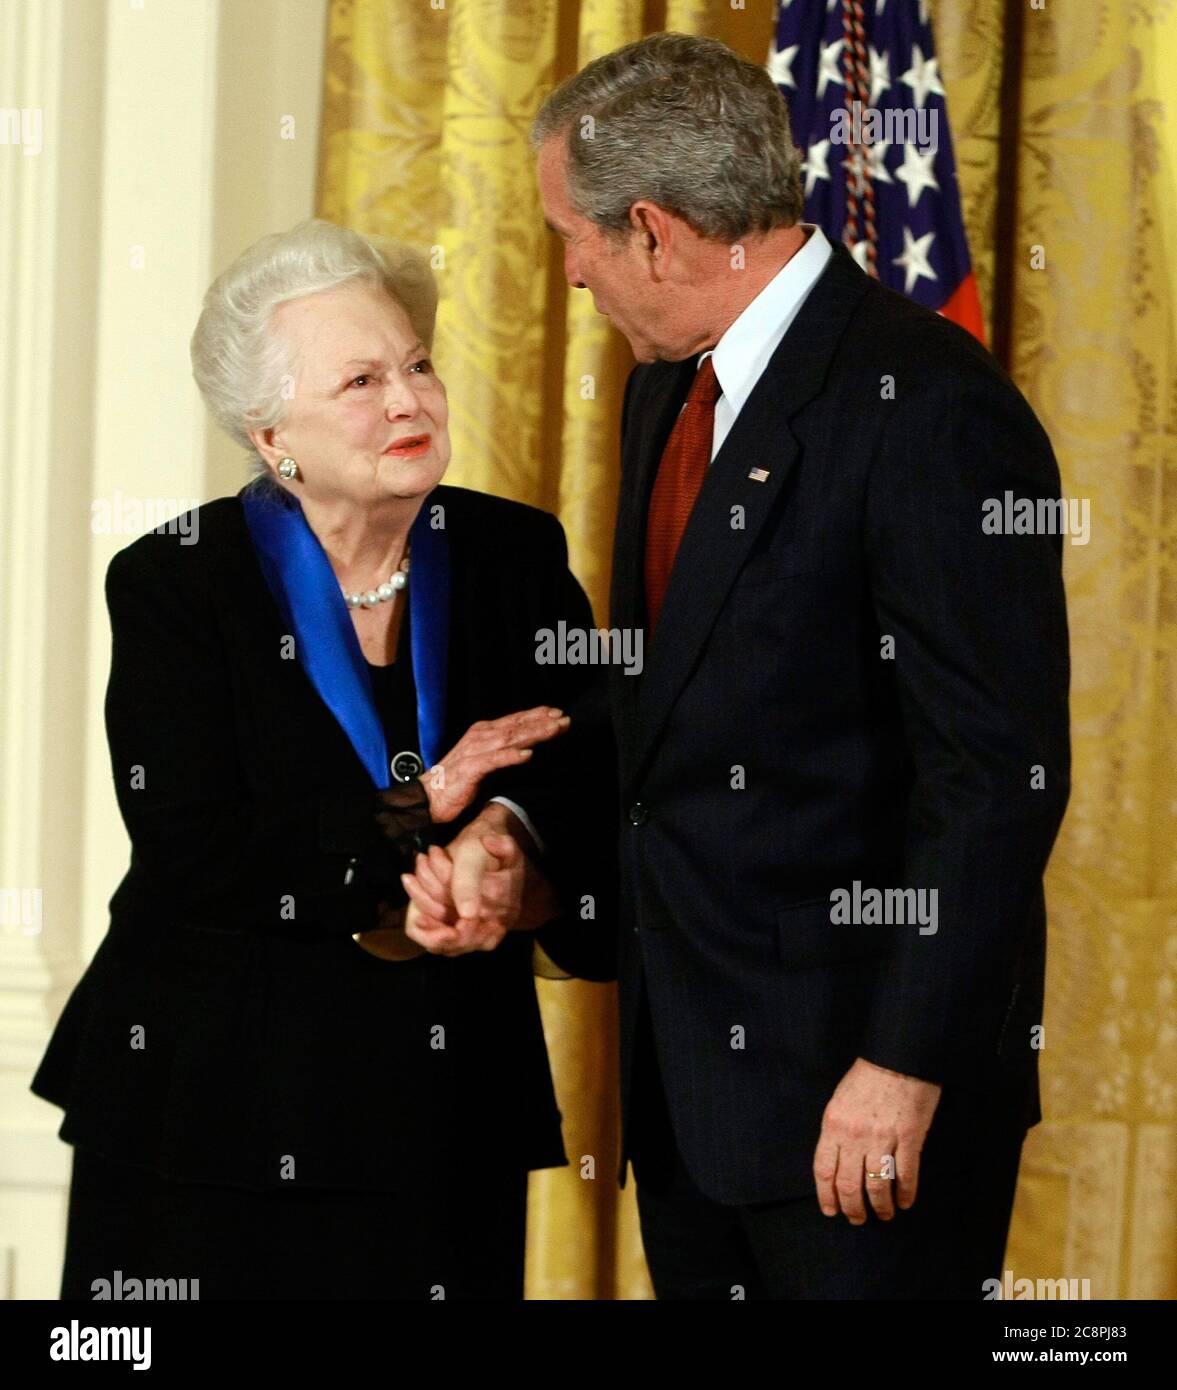 Washington, DC. 17th Nov, 2008. Washington, DC - November 17, 2008 -- United States President George W. Bush congratulates actress Olivia de Havilland after presenting her with the 2008 National Medals of Arts award during an event in the East Room at the White House on Monday, November 17, 2008 in Washington, DC. During the event president Bush presented recipients with awards for the National Medals of Arts and the National Humanities Medal.Credit: Mark Wilson - Pool via CNP | usage worldwide Credit: dpa/Alamy Live News Stock Photo